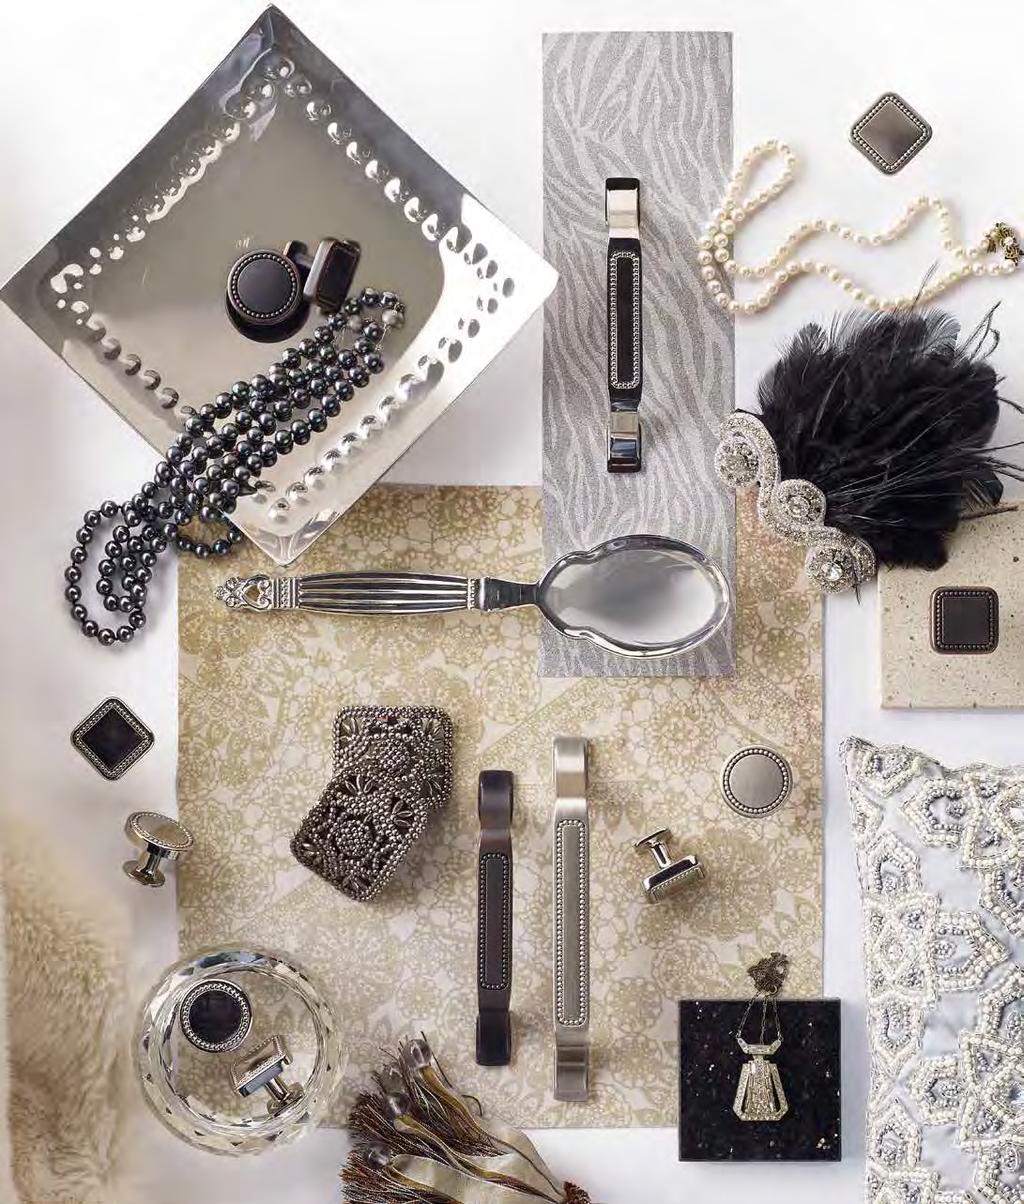 ON-TREND FINISHES (PN) (G0) (ORB) SHOWROOM SPECIALTY COLLECTION CAROLYNE The Carolyne collection takes its cues from the roaring 0 s with